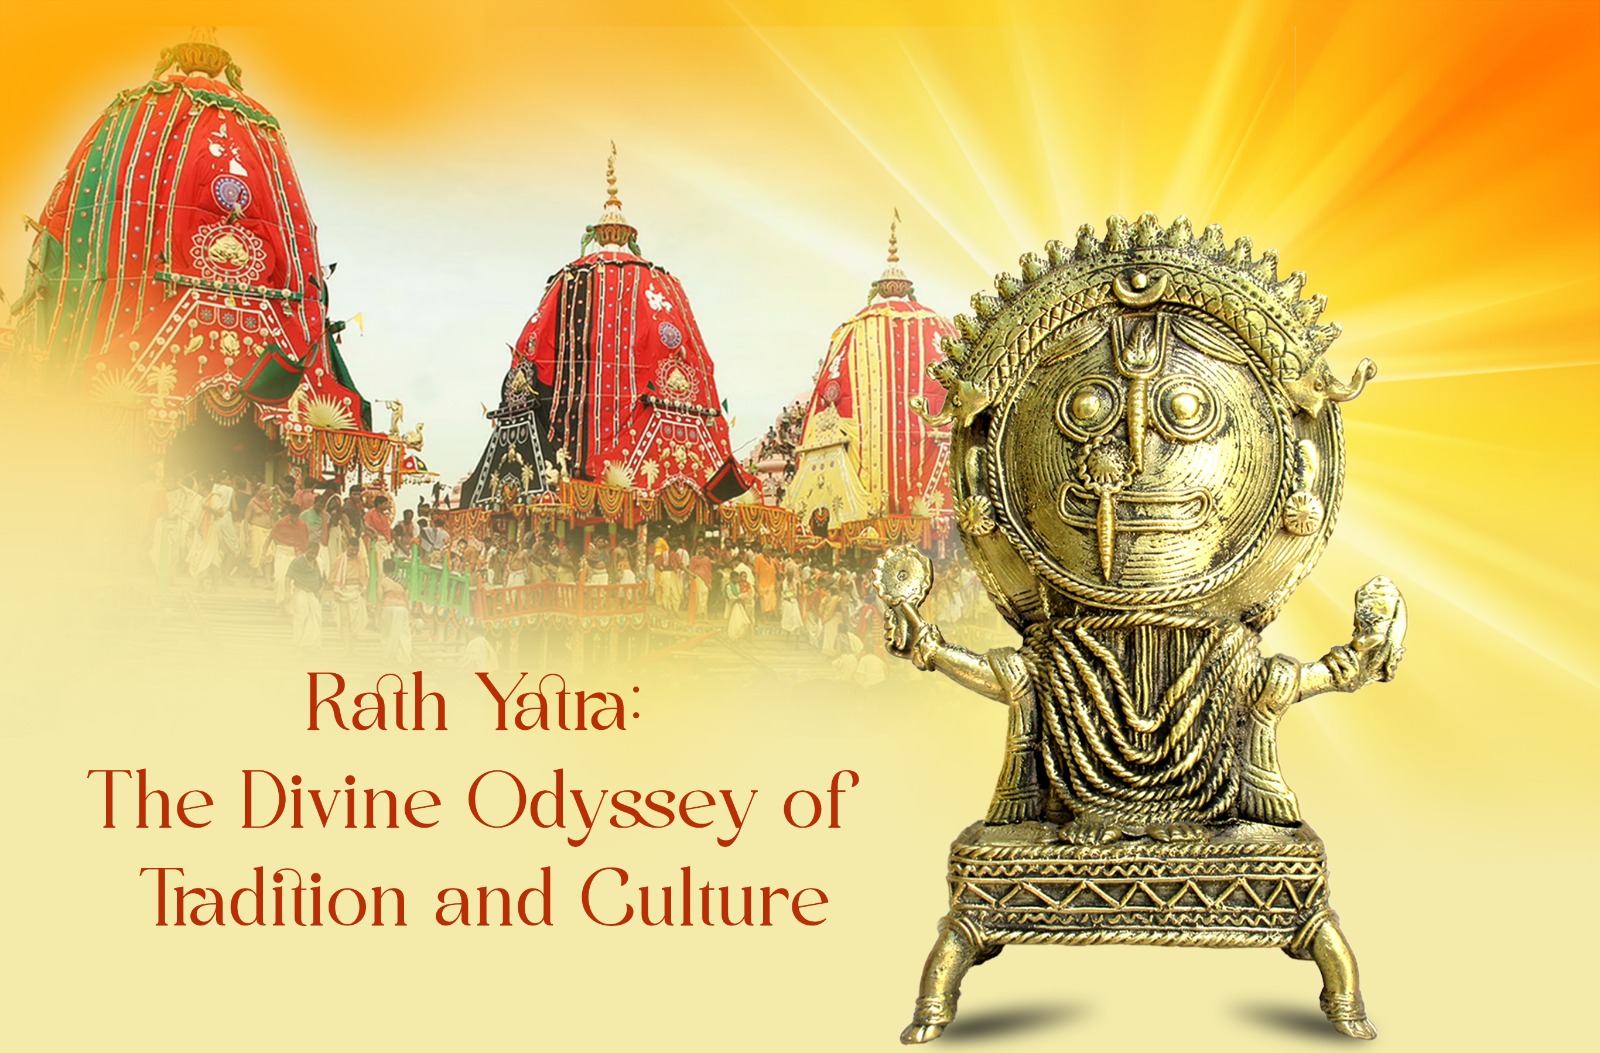 The Divine Odyssey of Tradition and Culture JAGANNATH RATH YATRA